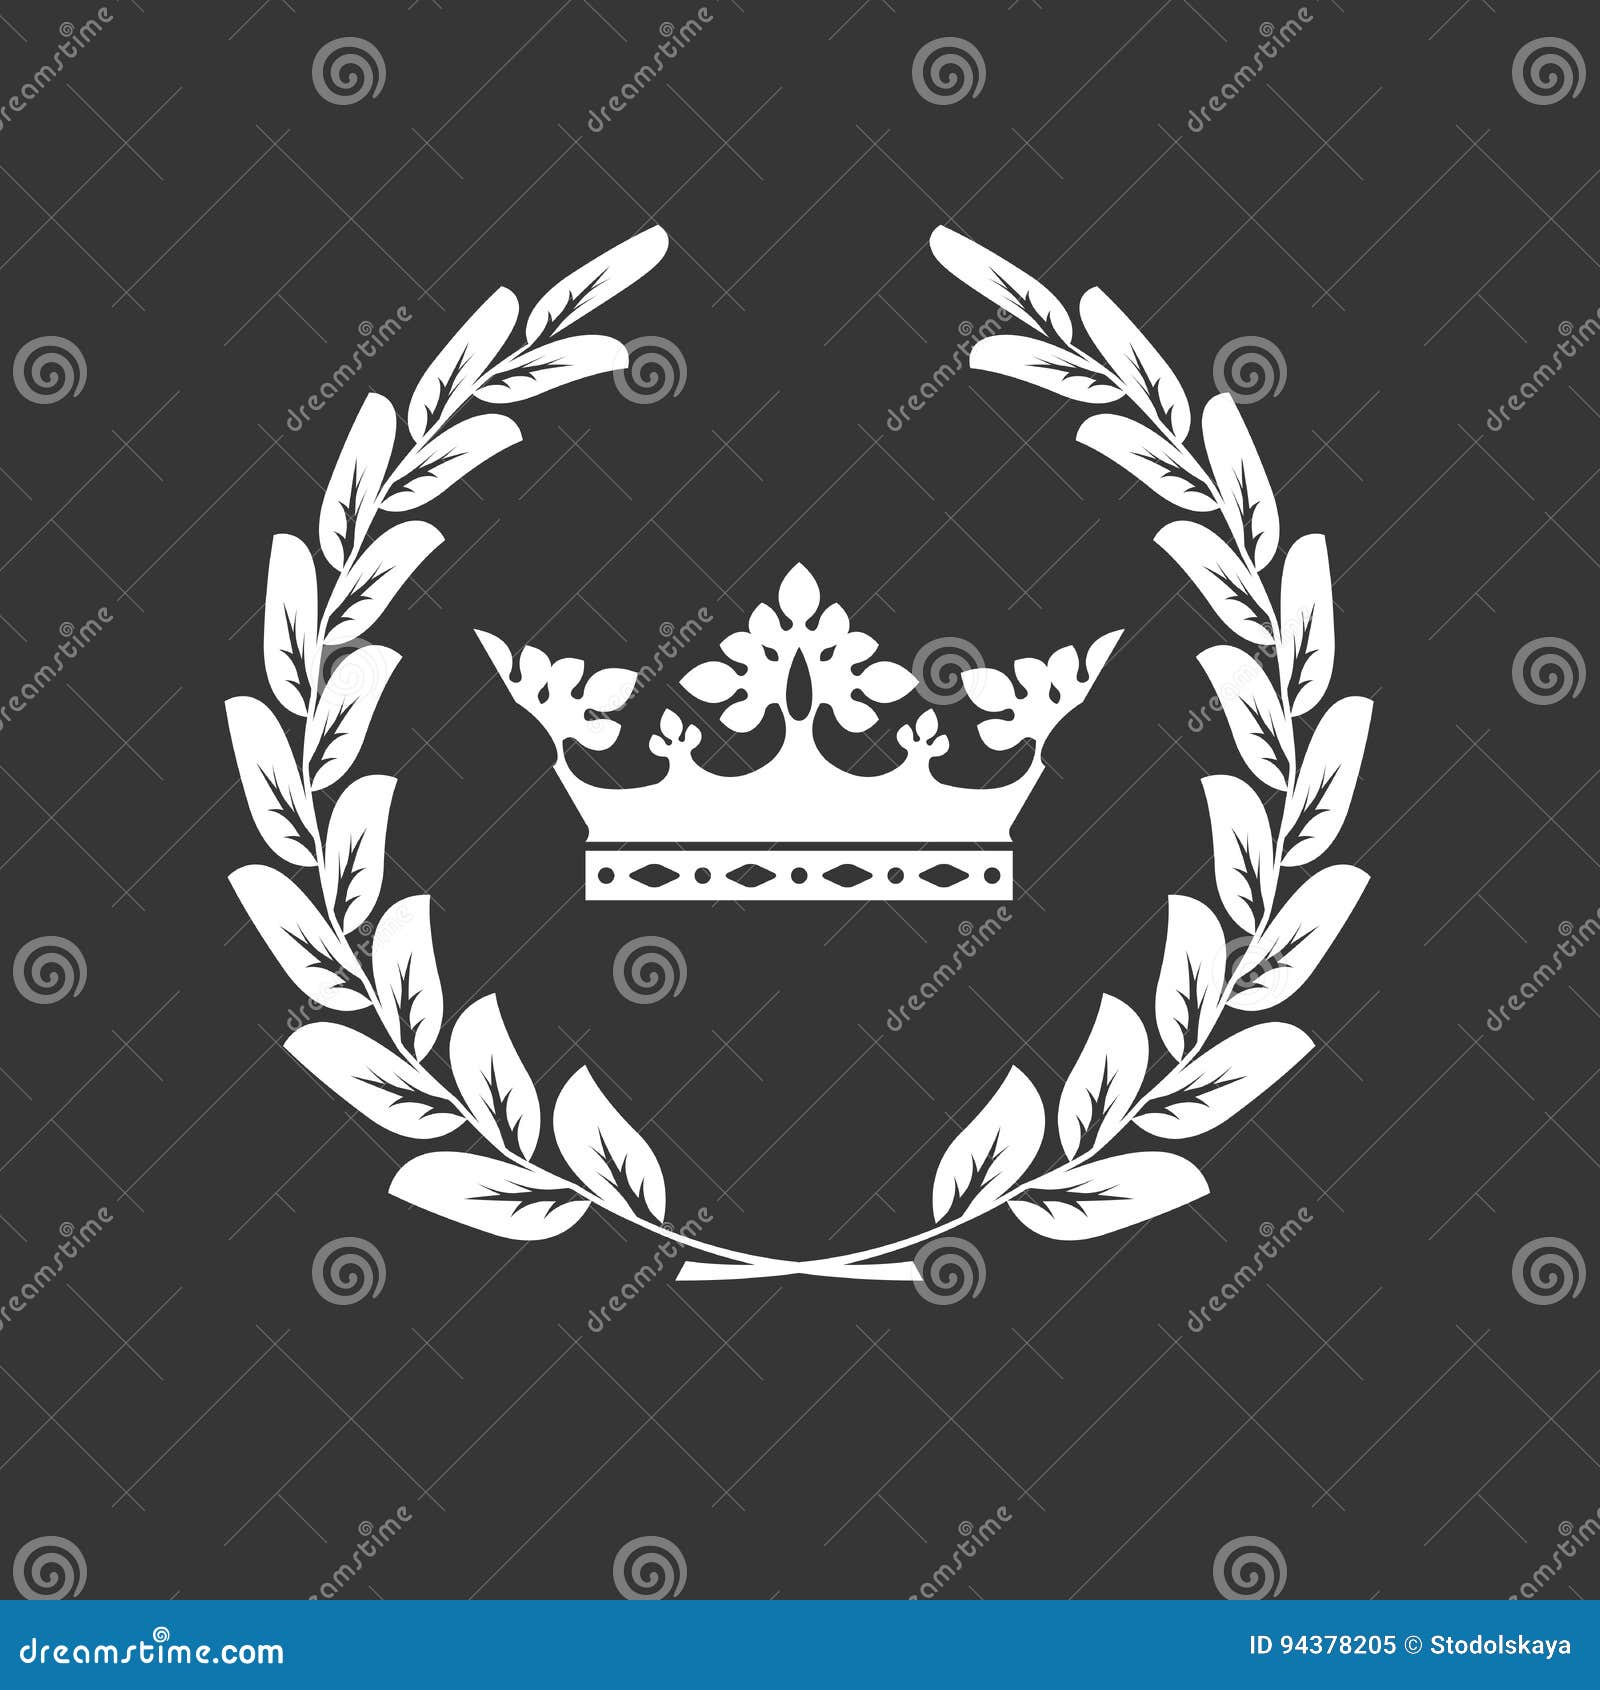 crown and laurel wreath - blazon or coat of arms